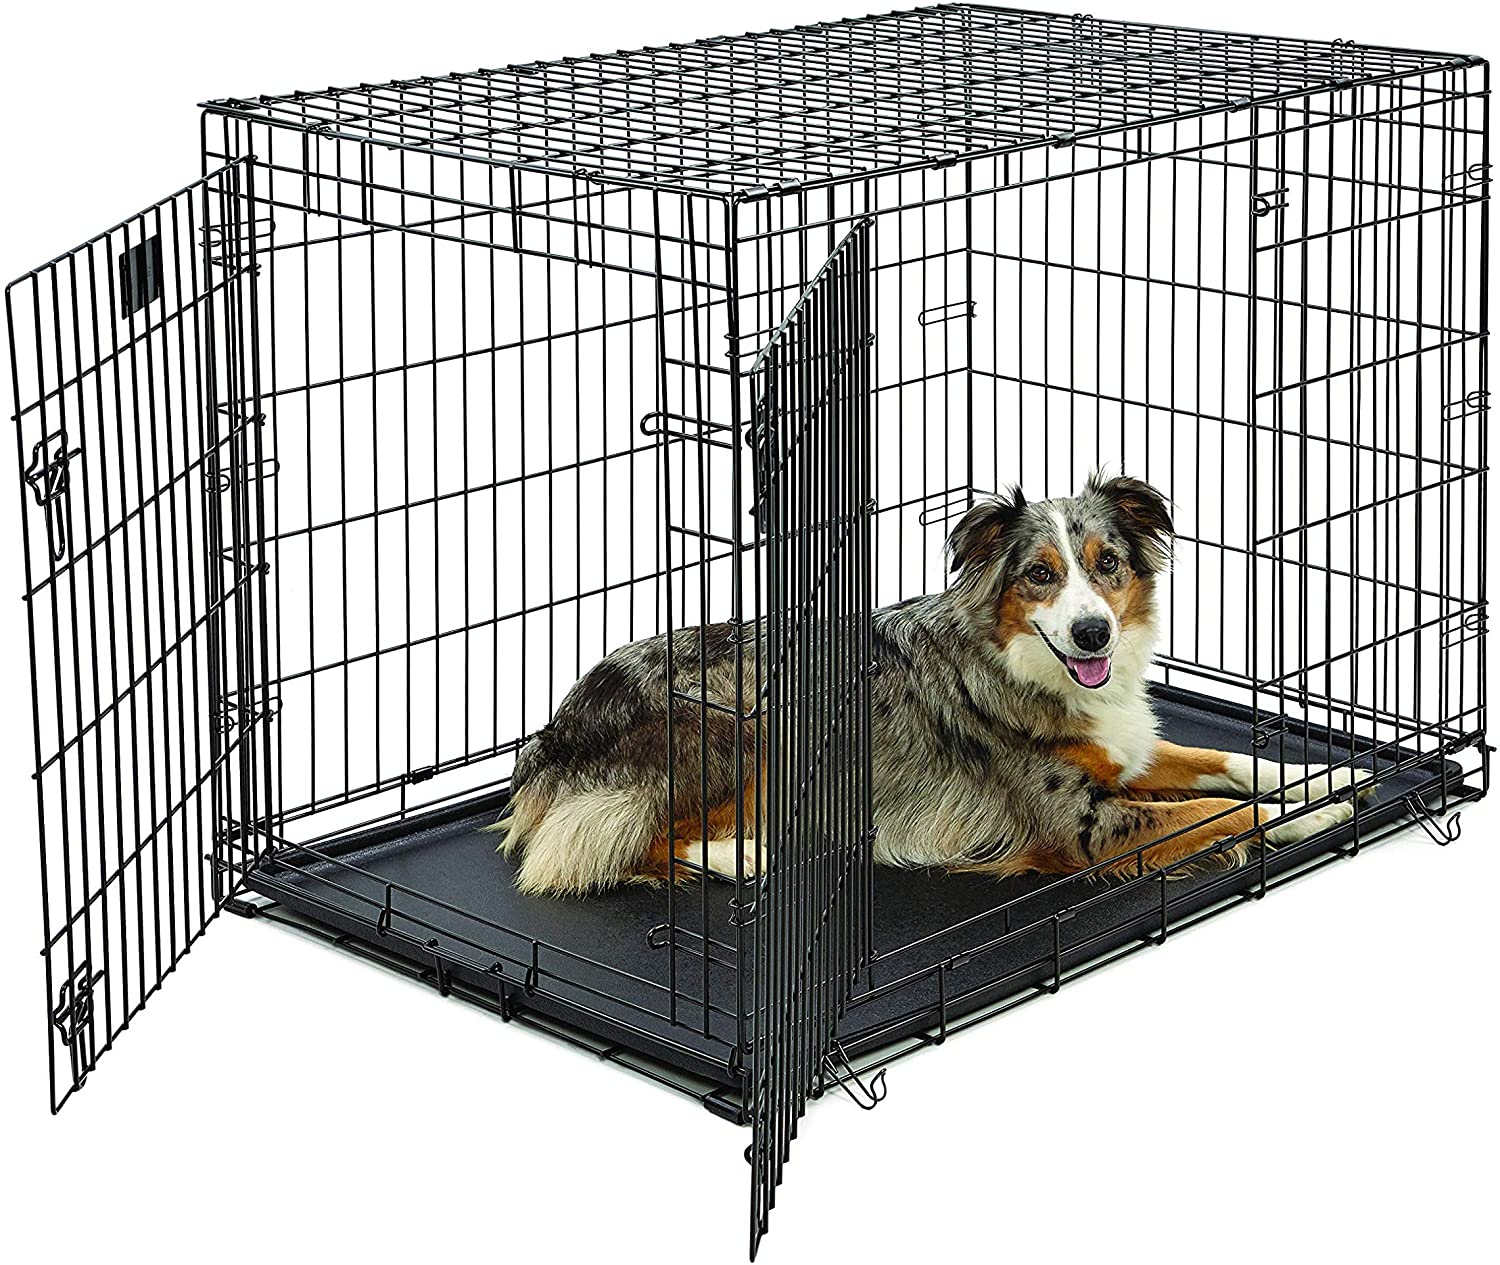 MidWest Folding Metal Dog Kennel